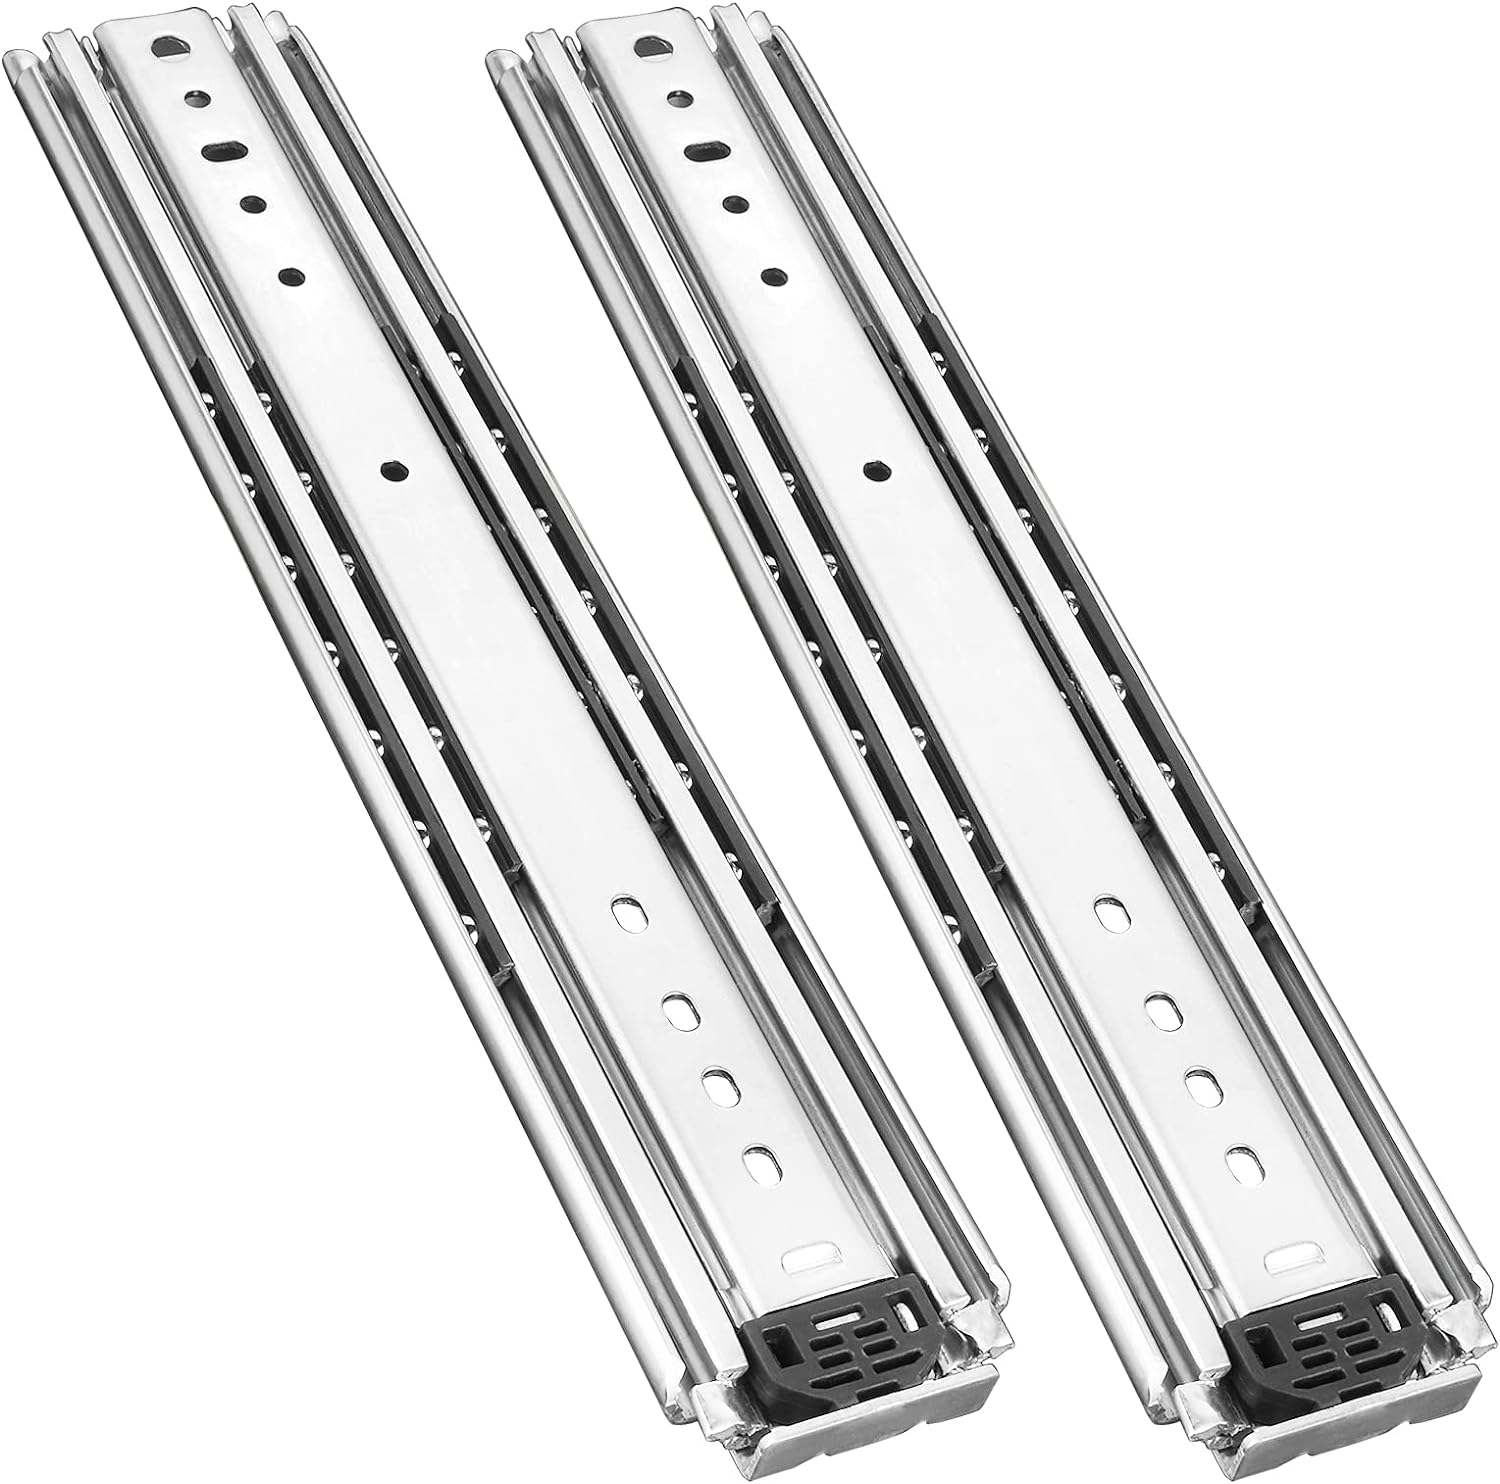 KCOLVSION 1 Pair 36 Inch 150 Lb Capacity Heavy Duty Drawer Slides,Side Mount Undermount Full Extension 3 Fold Ball Bearing Stainless Steel Furniture Hardware Drawer Rails